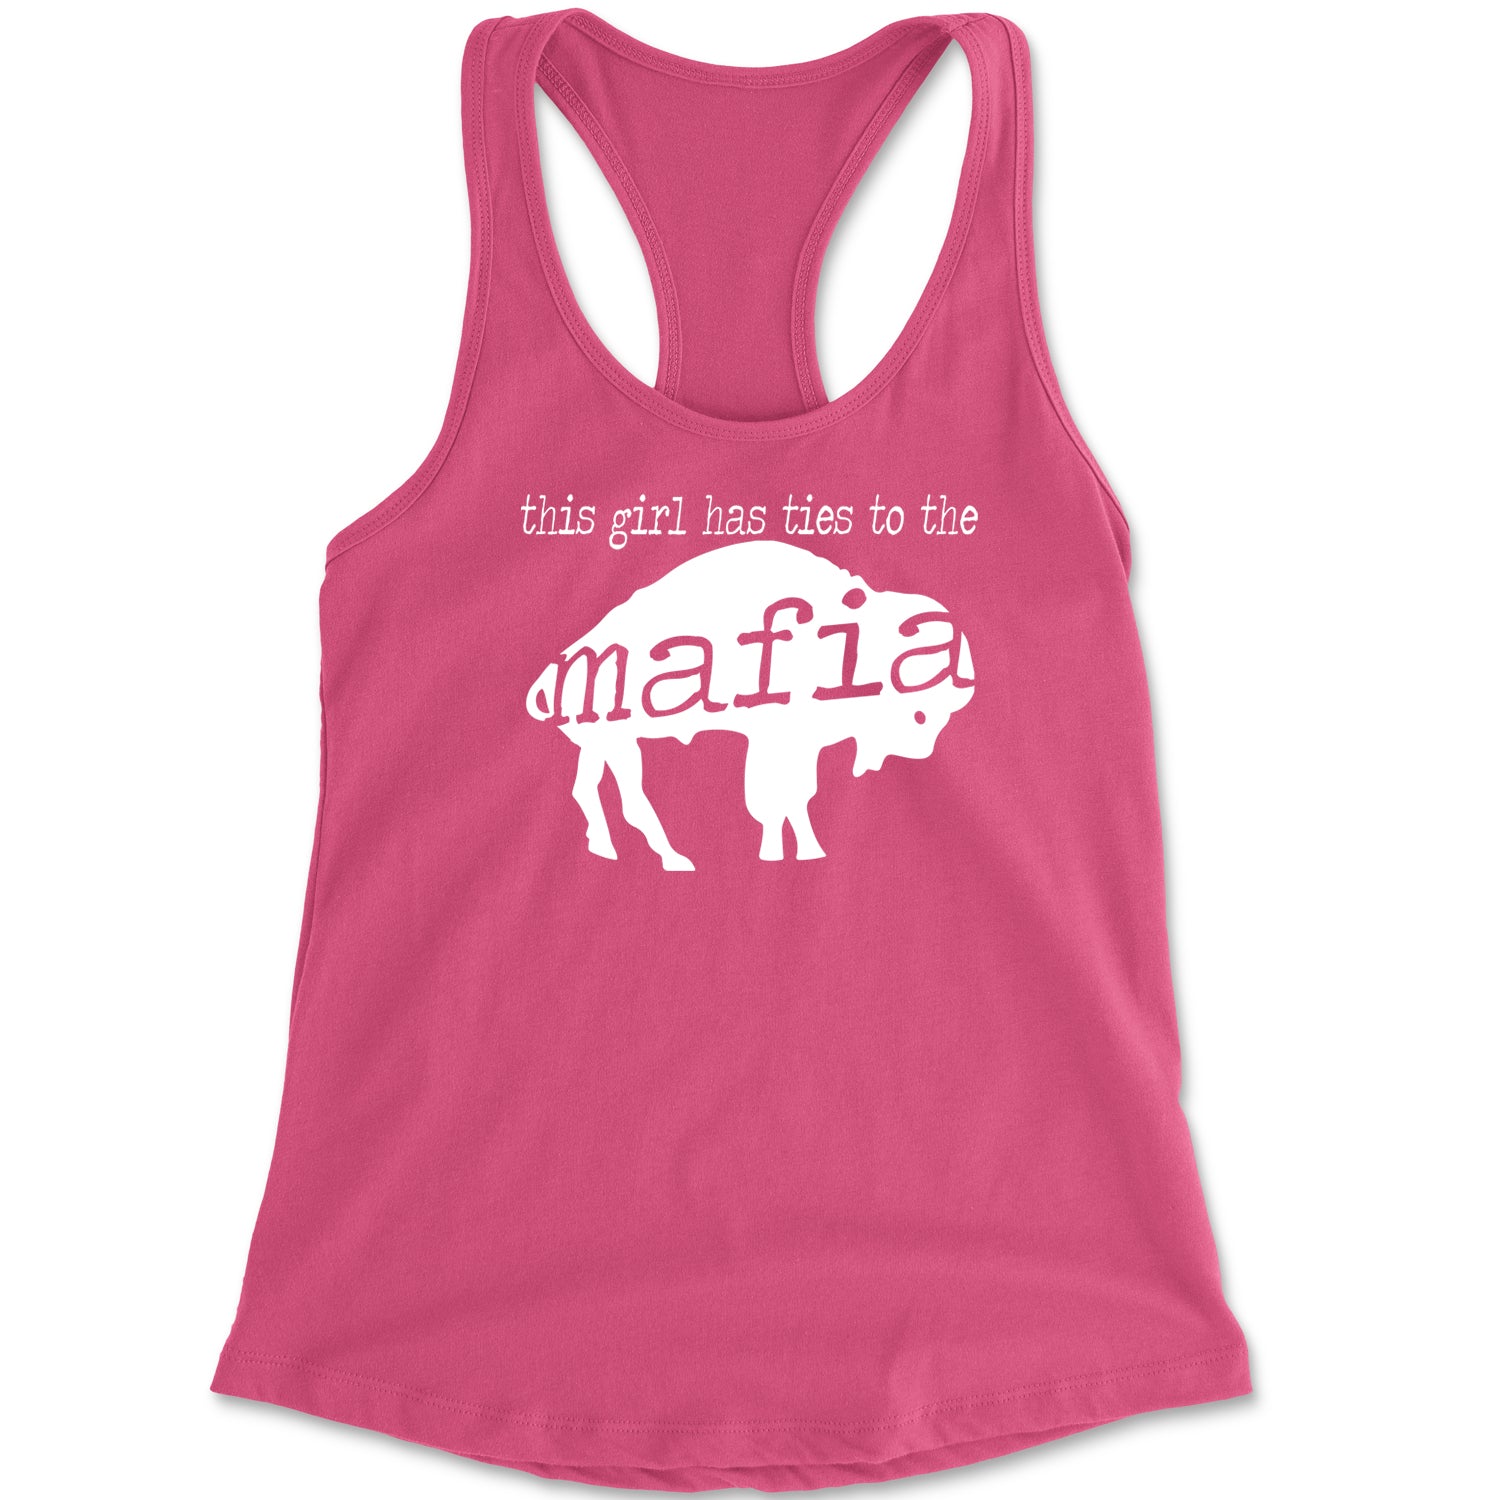 This Girl Has Ties To The Bills Mafia Racerback Tank Top for Women bills, fan, football, new, sports, team, york by Expression Tees